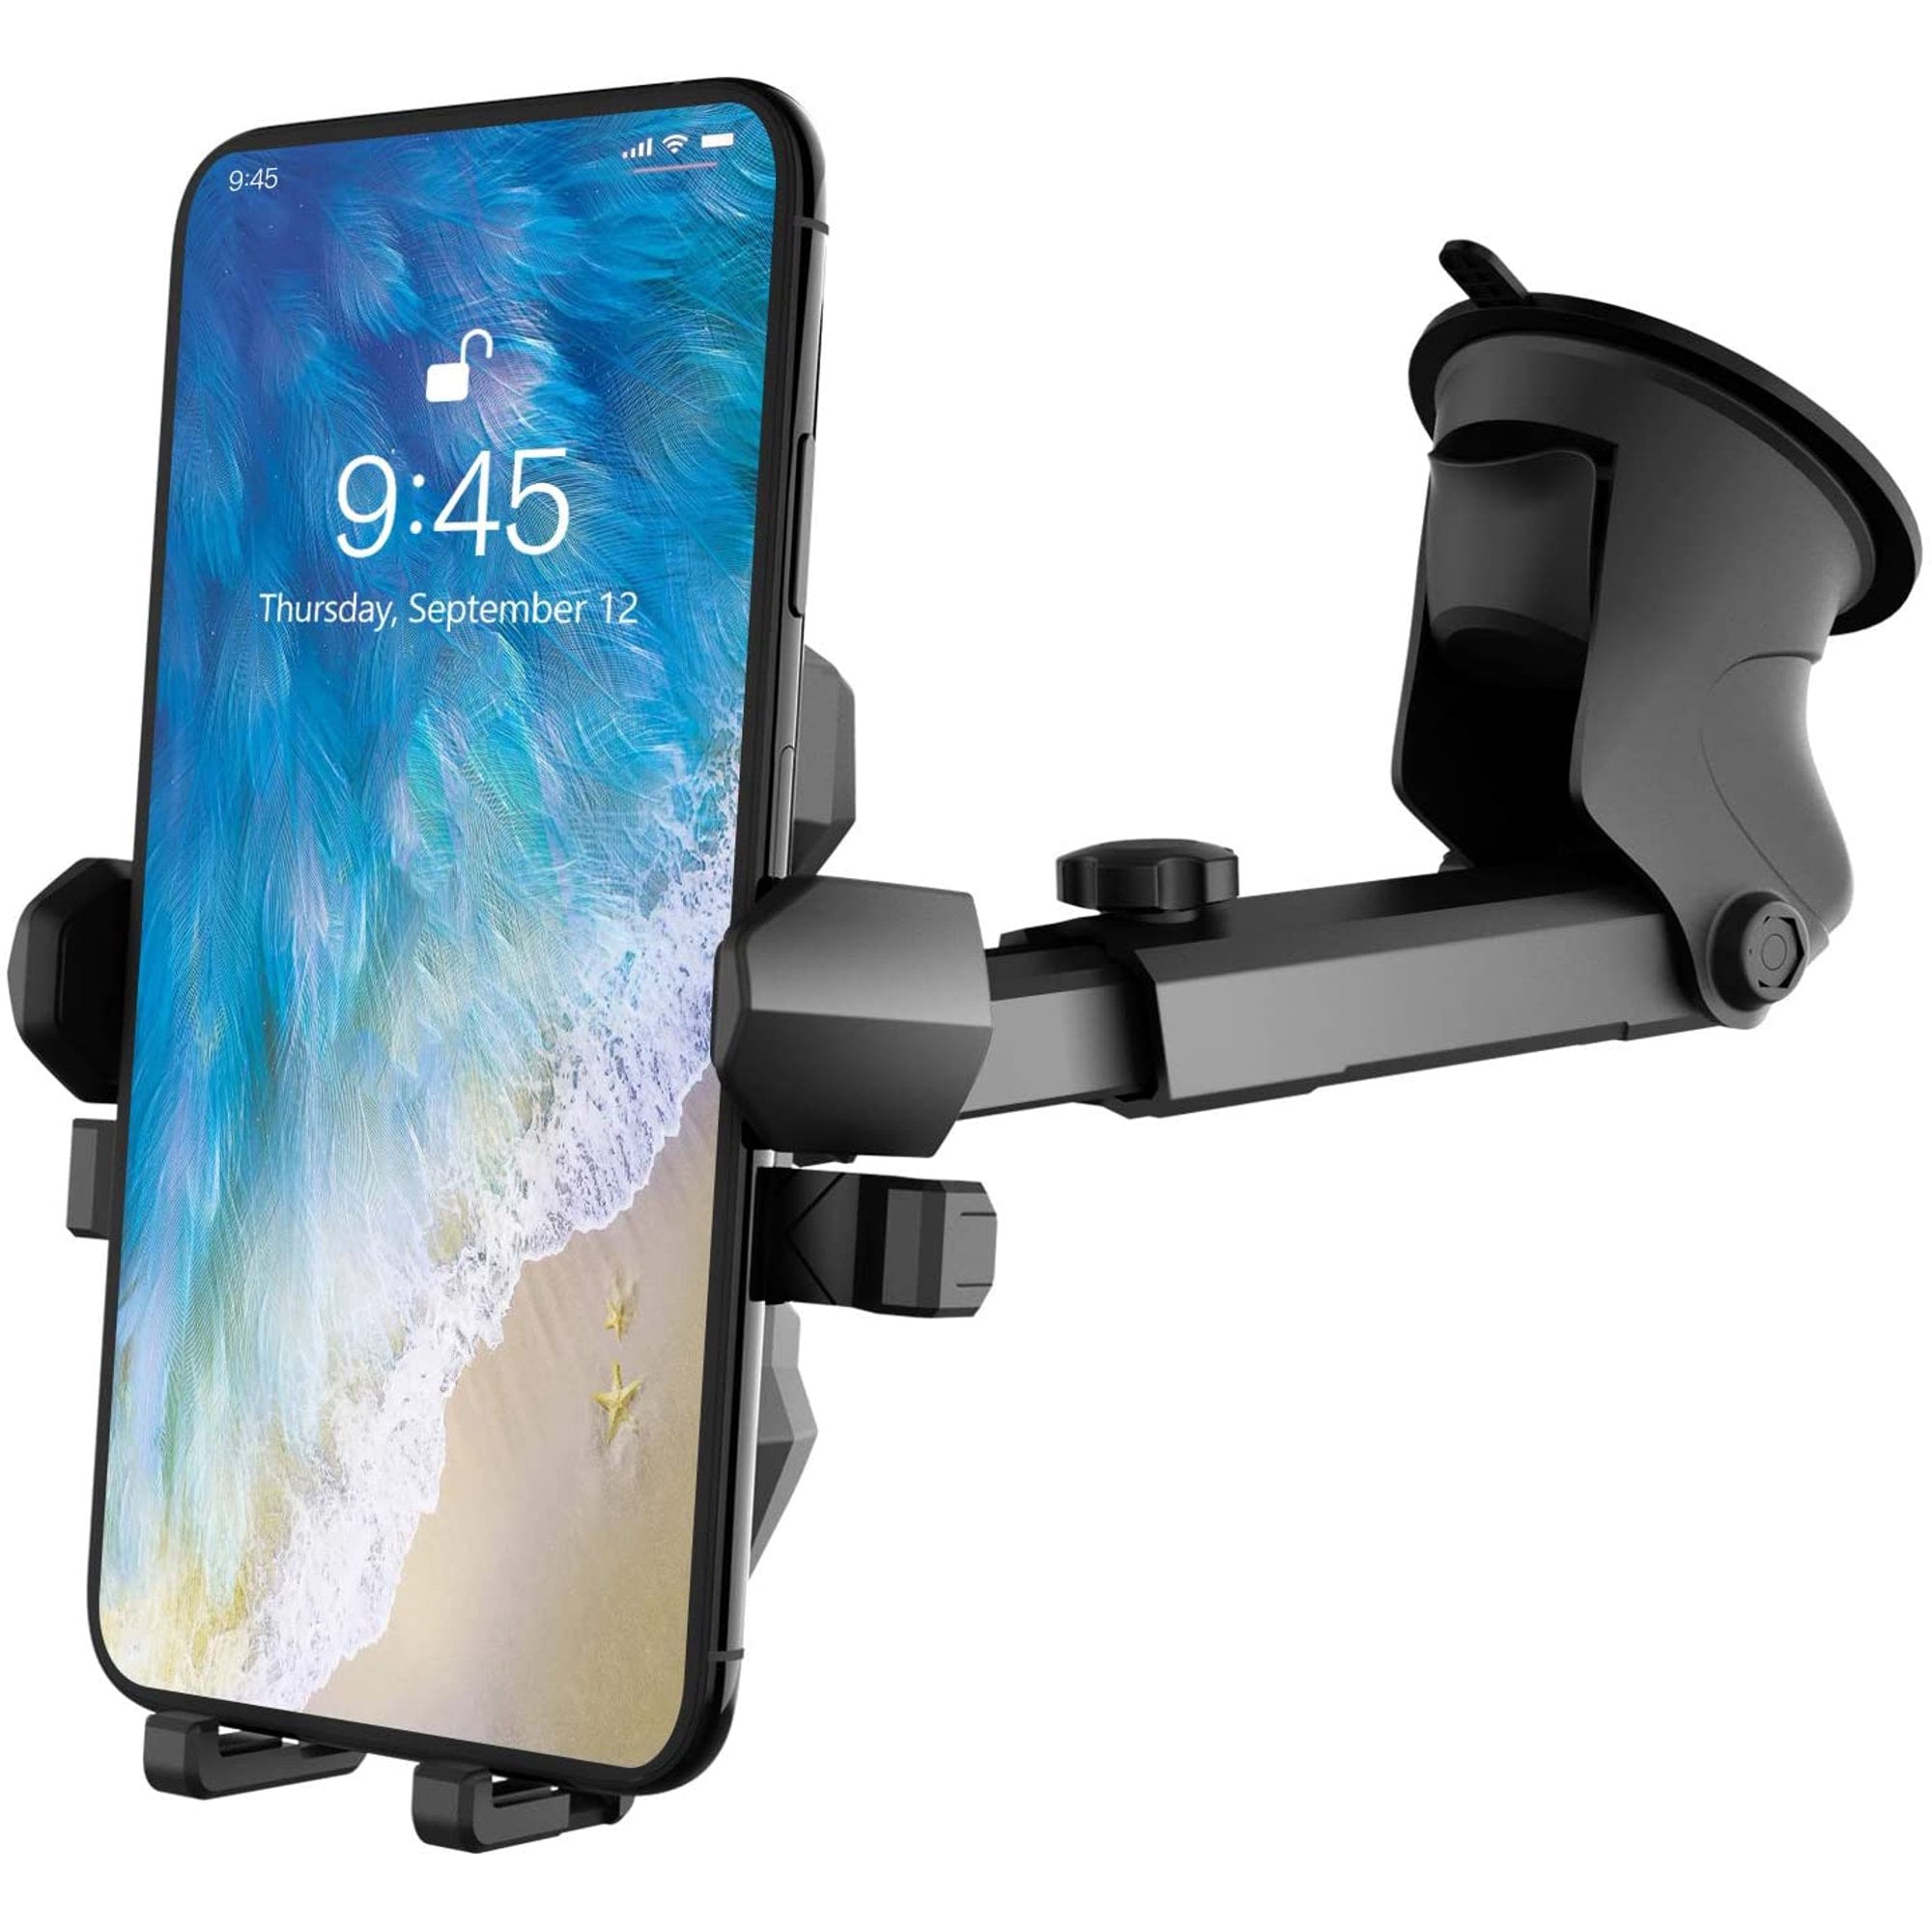 One-Touch Design Compatible for iPhone Xs/Xs Max/XR/ X/ 8/8 Plus/ 7/7 Plus Galaxy S9 S9 Plus and More 4351542107 Car Phone Mount VUP Windshield Phone Holder Car Mount with Washable Strong Sticky Gel Pad 